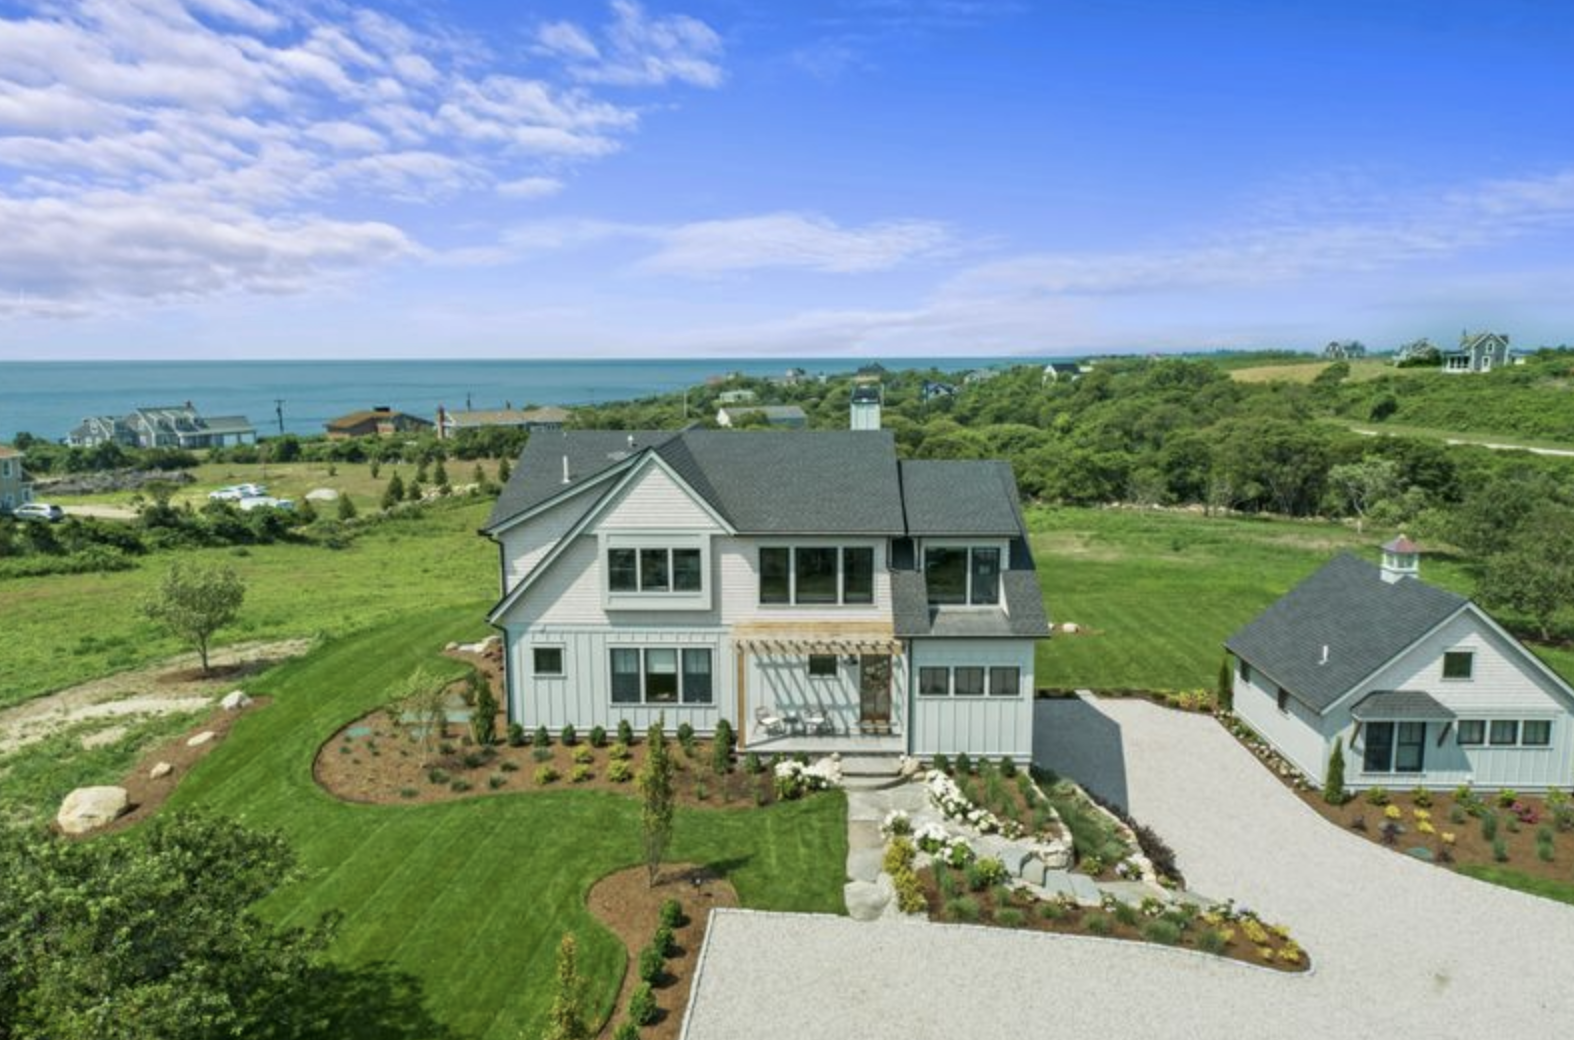 ROSEMARY TOBIN OF LILA DELMAN COMPASS COMPLETES  THIRD HIGHEST SALE ON BLOCK ISLAND YEAR-TO-DATE.*